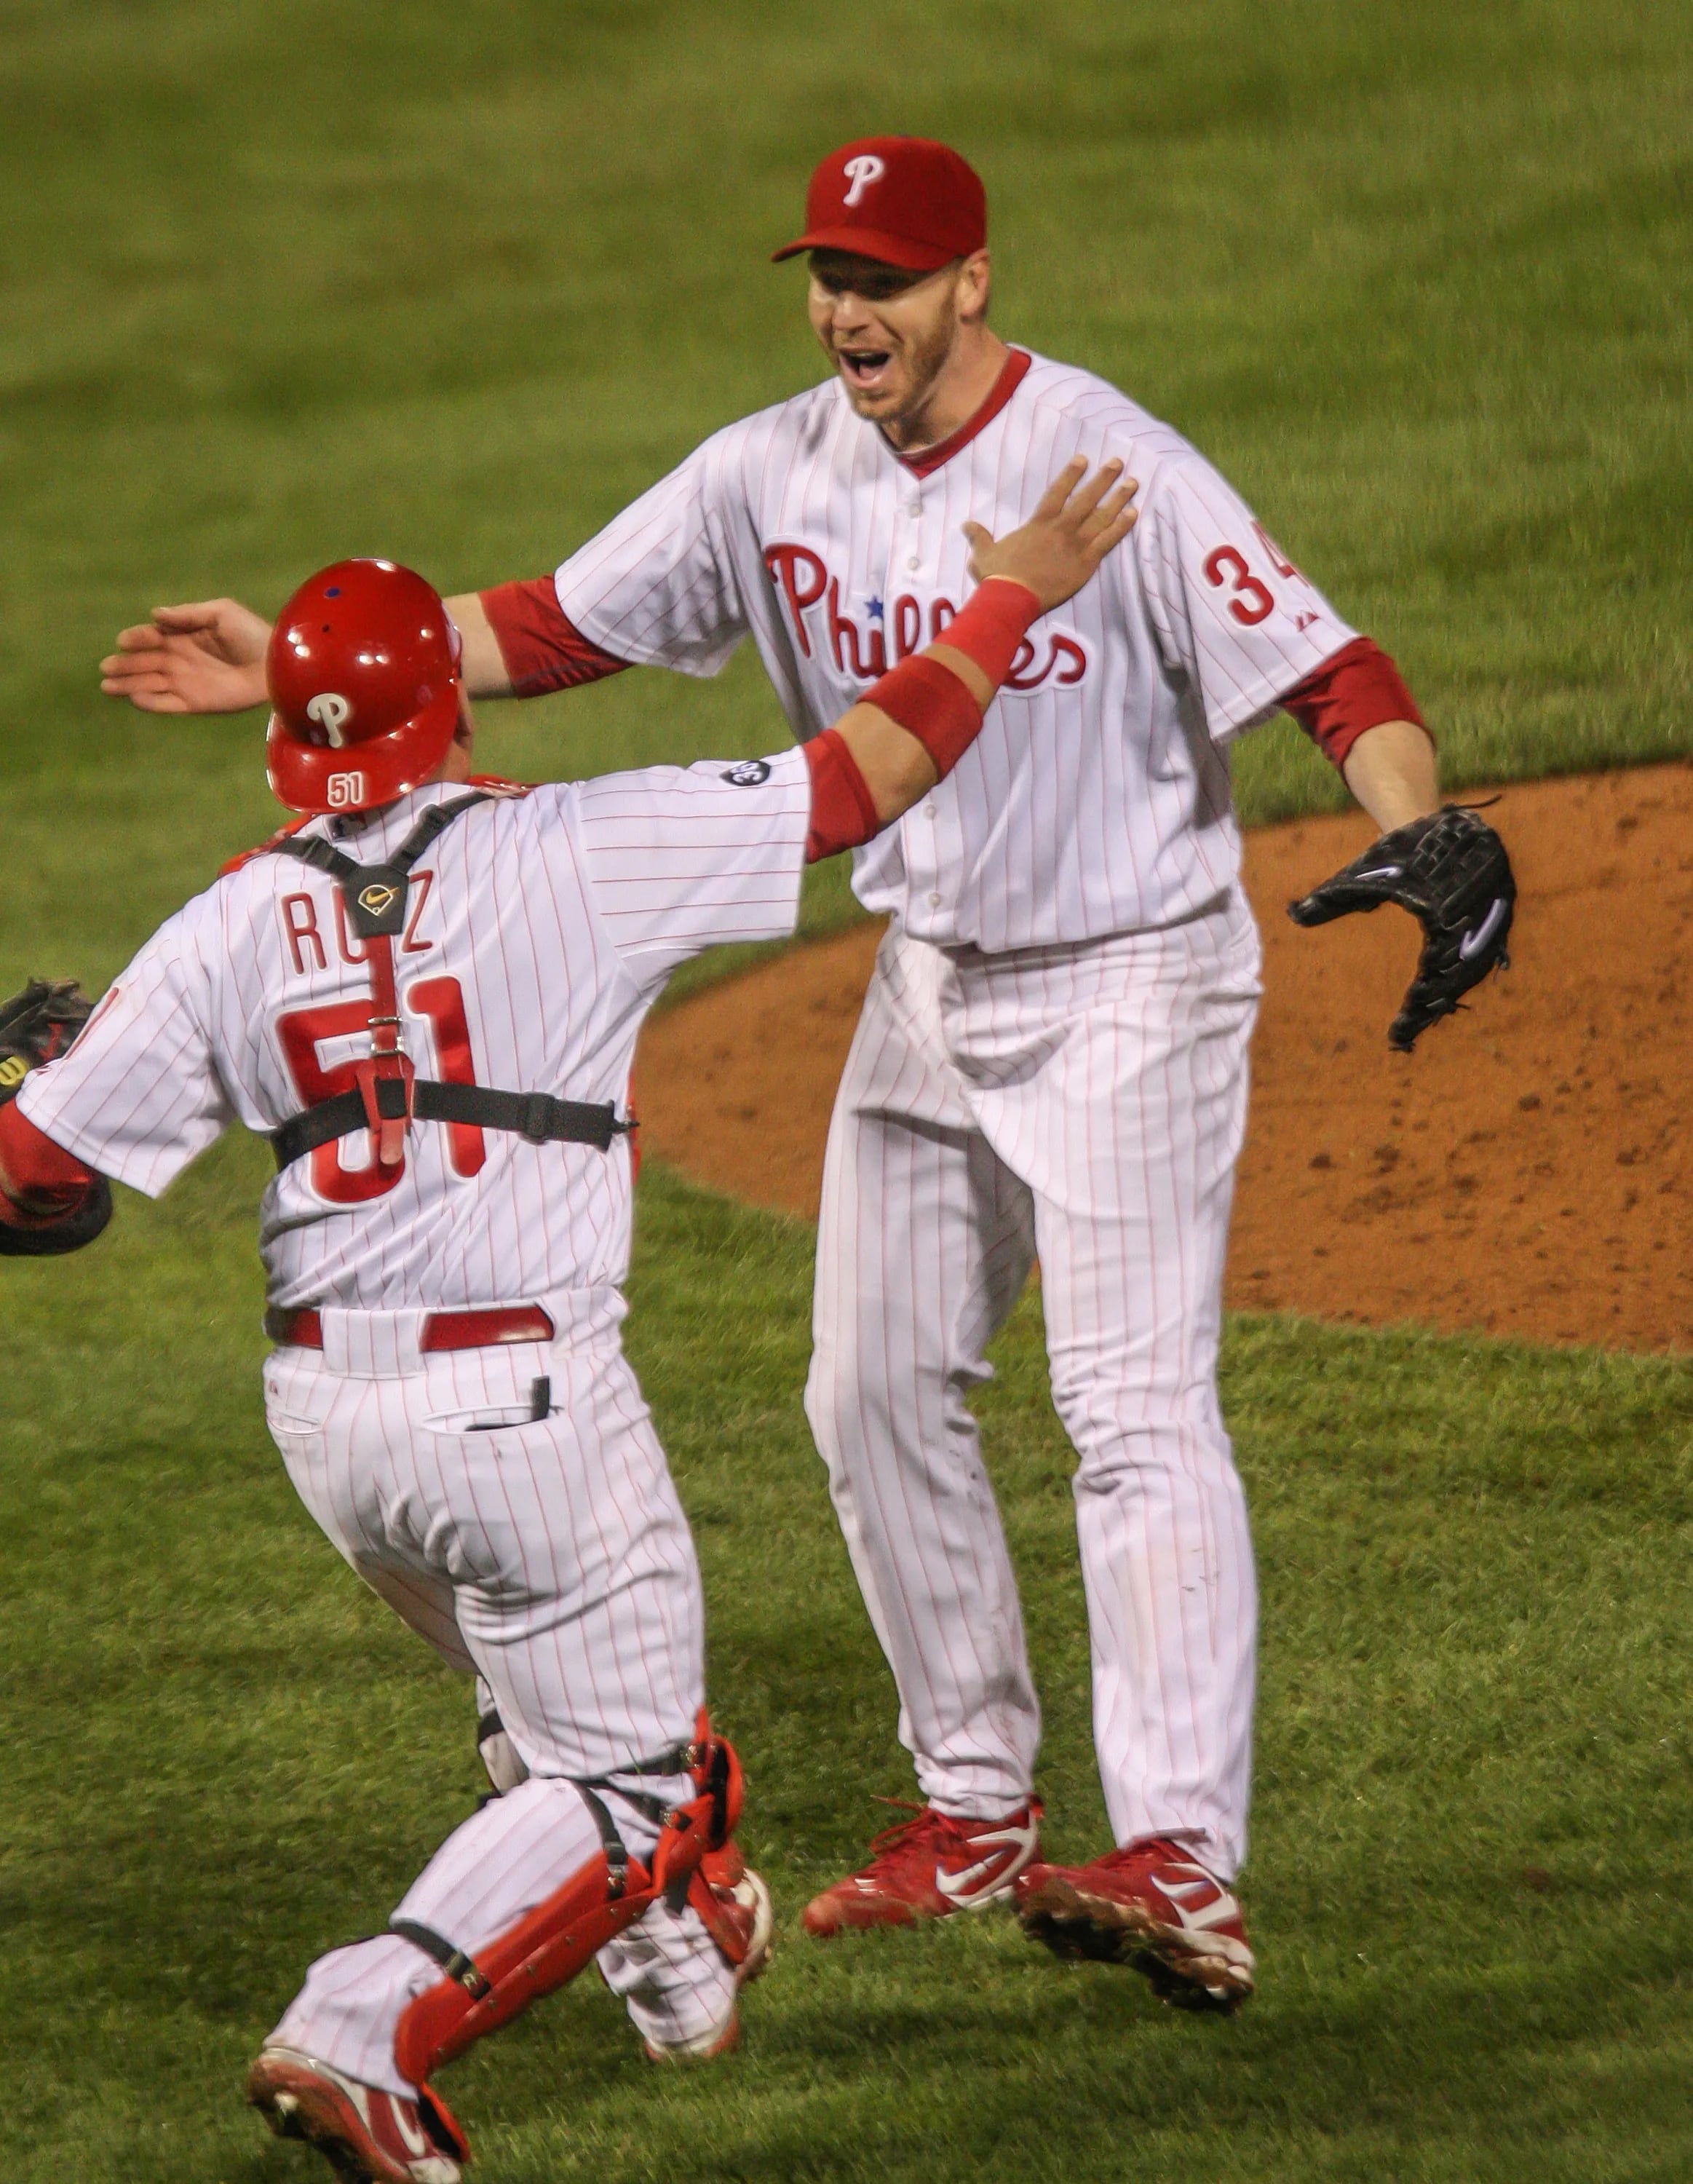 Phillies catcher Carlos Ruiz (51) runs up to hug pitcher Roy Halladay (34) after the last out in the ninth inning of their first National League Division Series game against the Cincinnati Reds at Citizens Bank Park on Oct. 6, 2010. Halladay pitched a no-hitter, and the Phillies won 4-0.